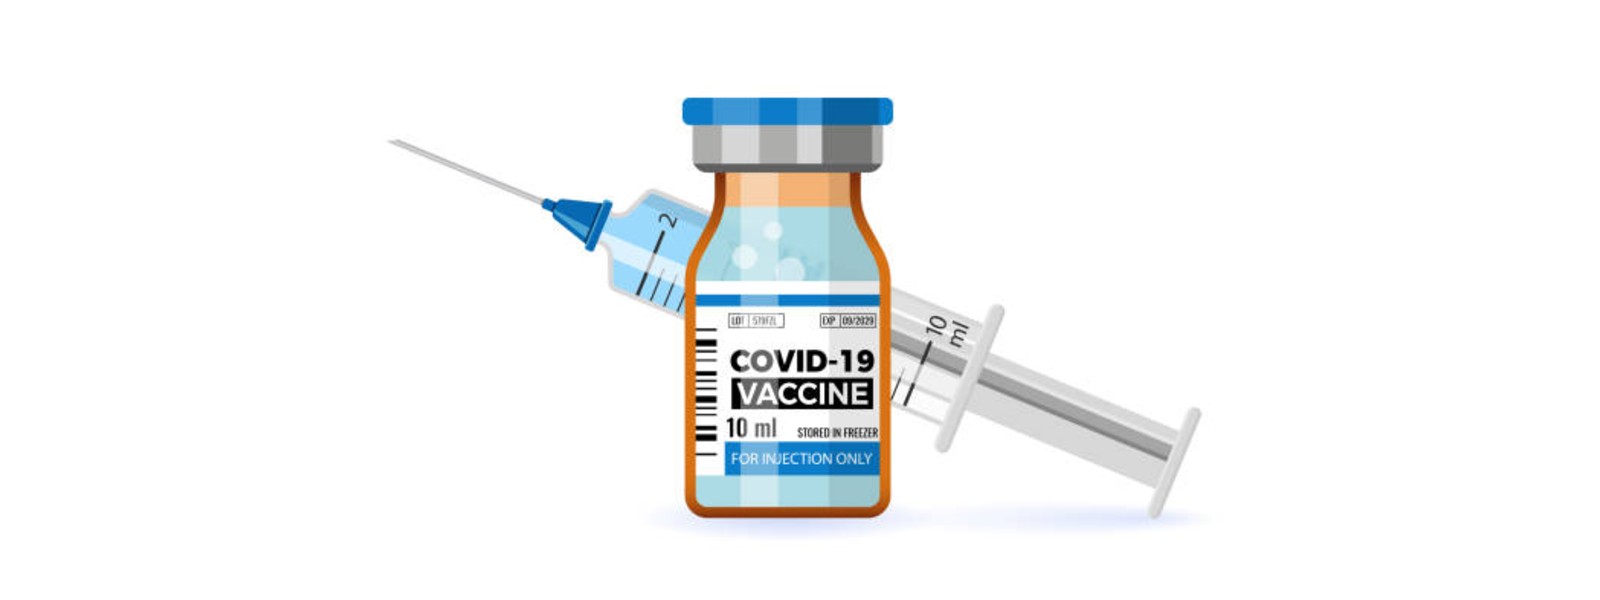 Over 4.6 Mn booster shots given in Sri Lanka against COVID-19